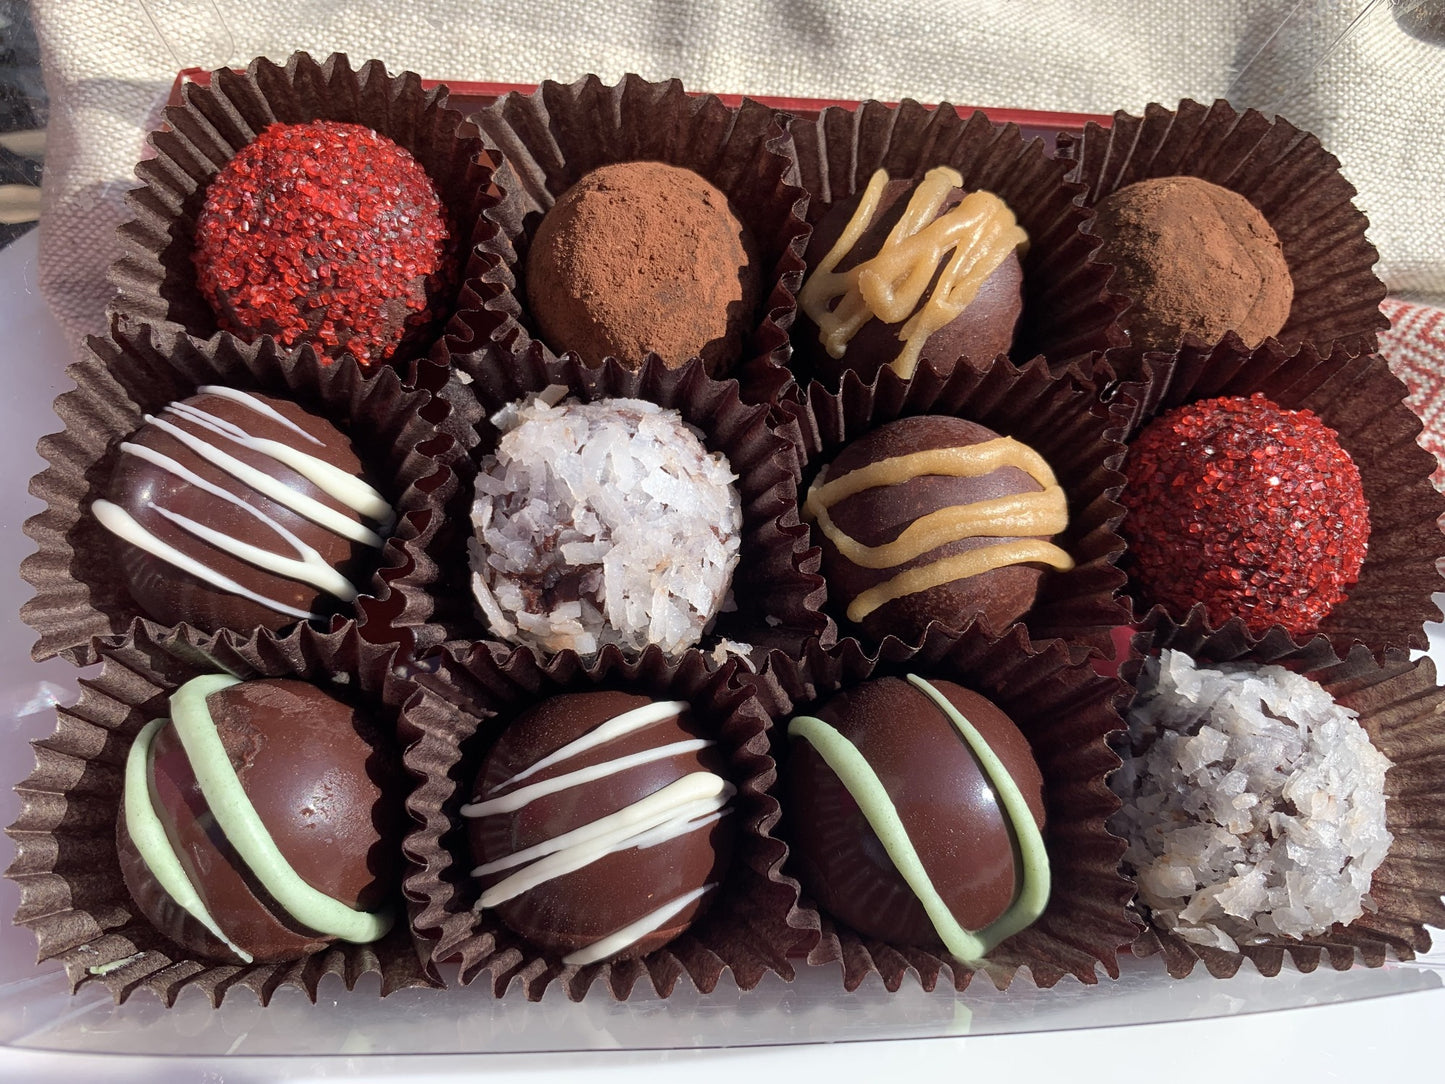 12 pieces of assorted truffles